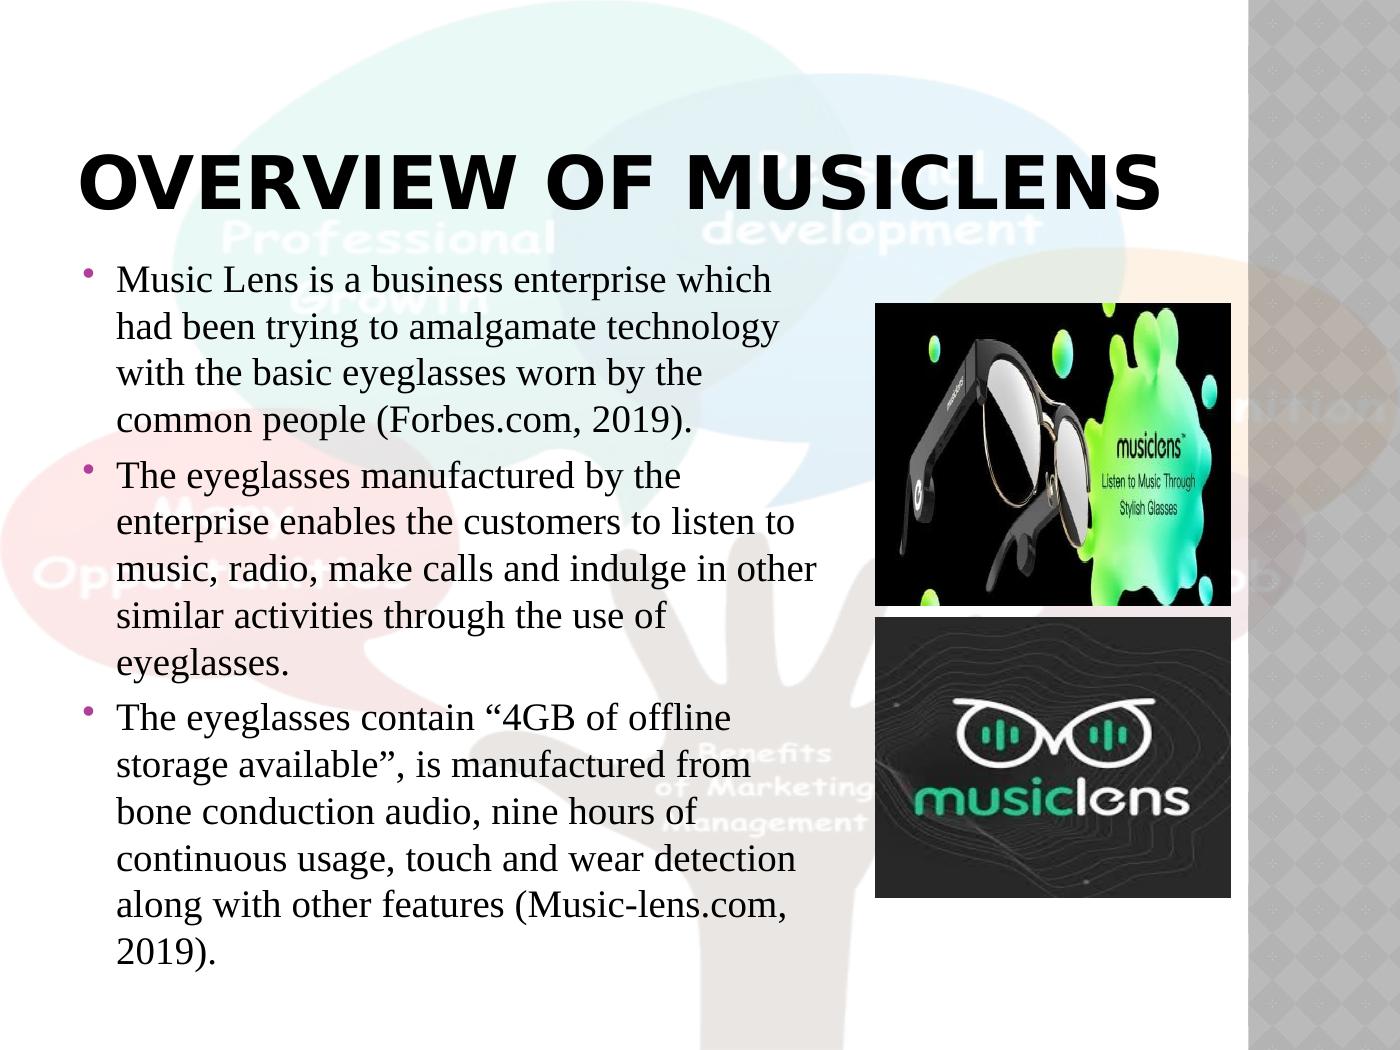 Marketing Management and Digital Communication: A Case Study of MusicLens_3